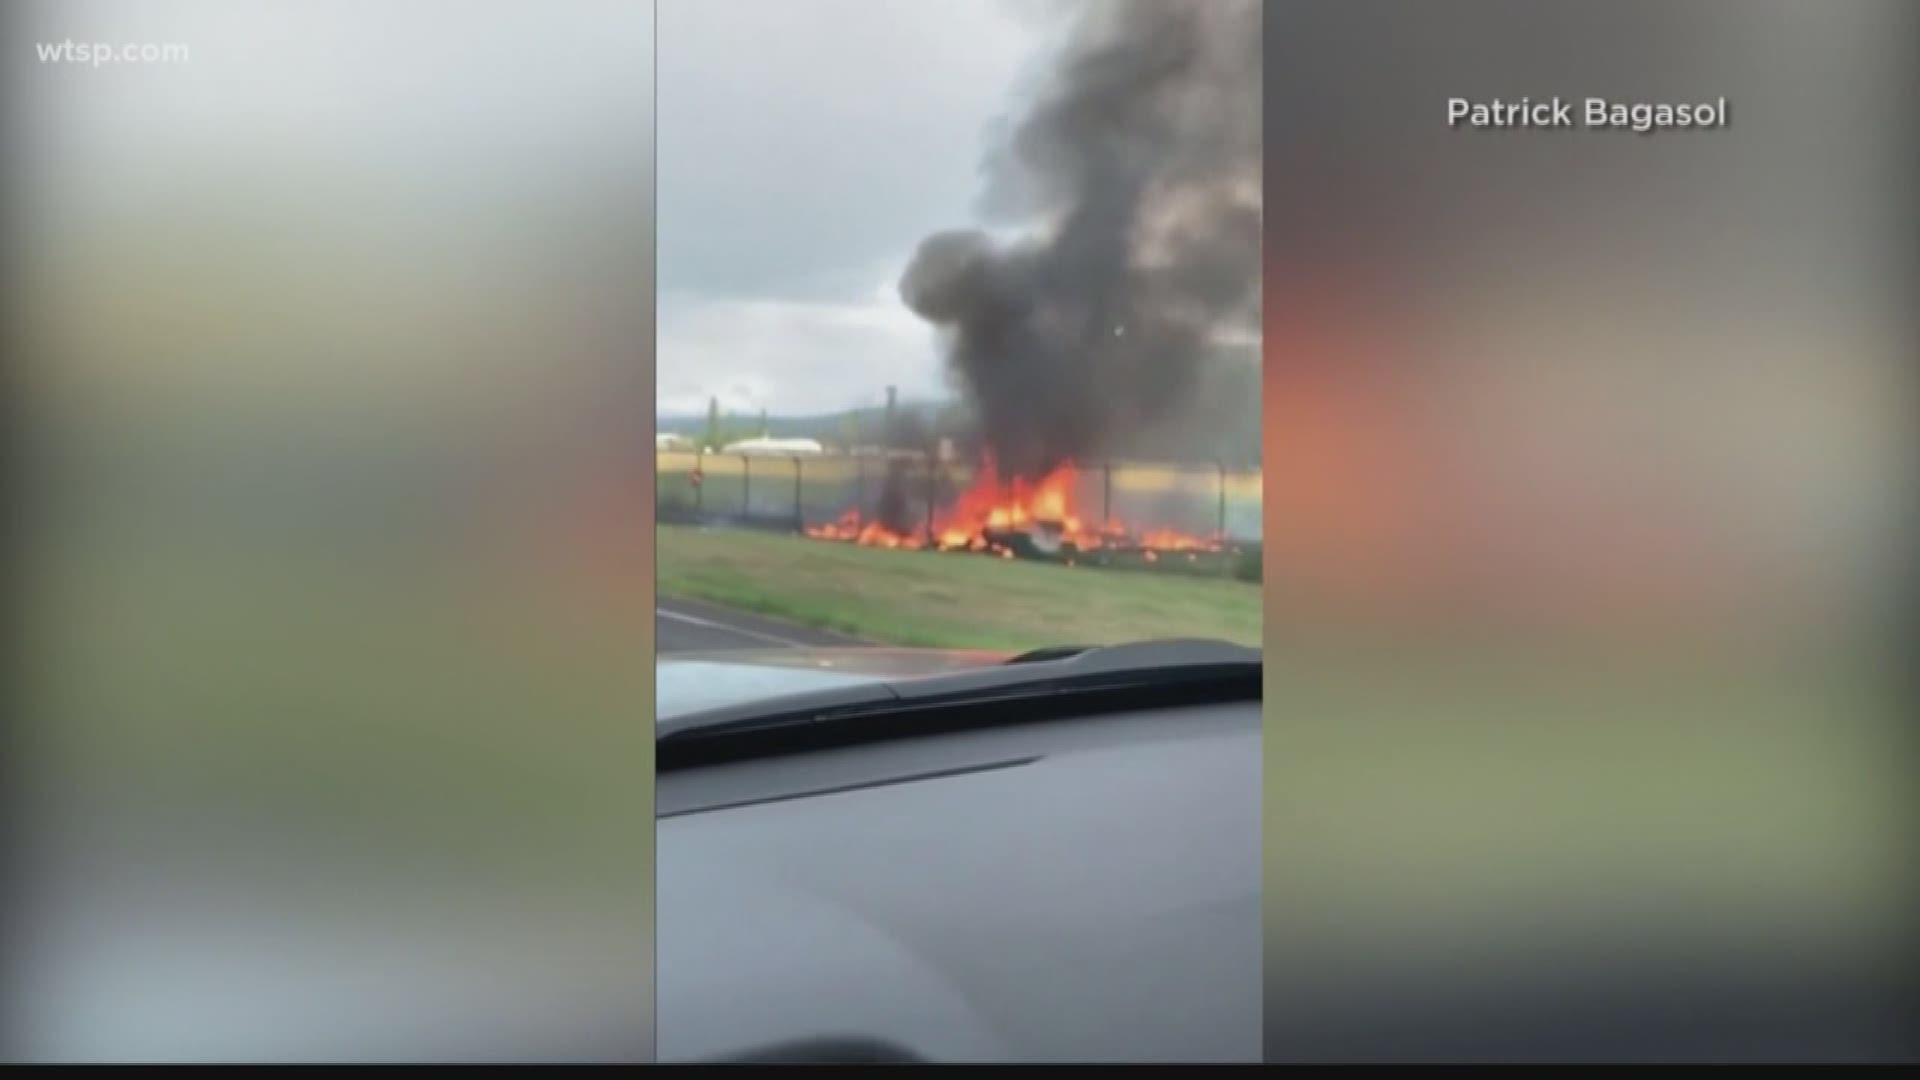 Nine people died in a fiery crash of a small airplane used in a skydive operation, officials in Hawaii said.

There were no survivors after the twin-engine King Air plane crashed Friday night near Dillingham Airfield, on Oahu's North Shore, Hawaii Department of Transportation spokesman Tim Sakahara said.

"Upon arrival, we saw the plane fully engulfed in fire," Honolulu Fire Chief Manuel Neves told reporters on the scene. "The first crews on scene extinguished the fire."